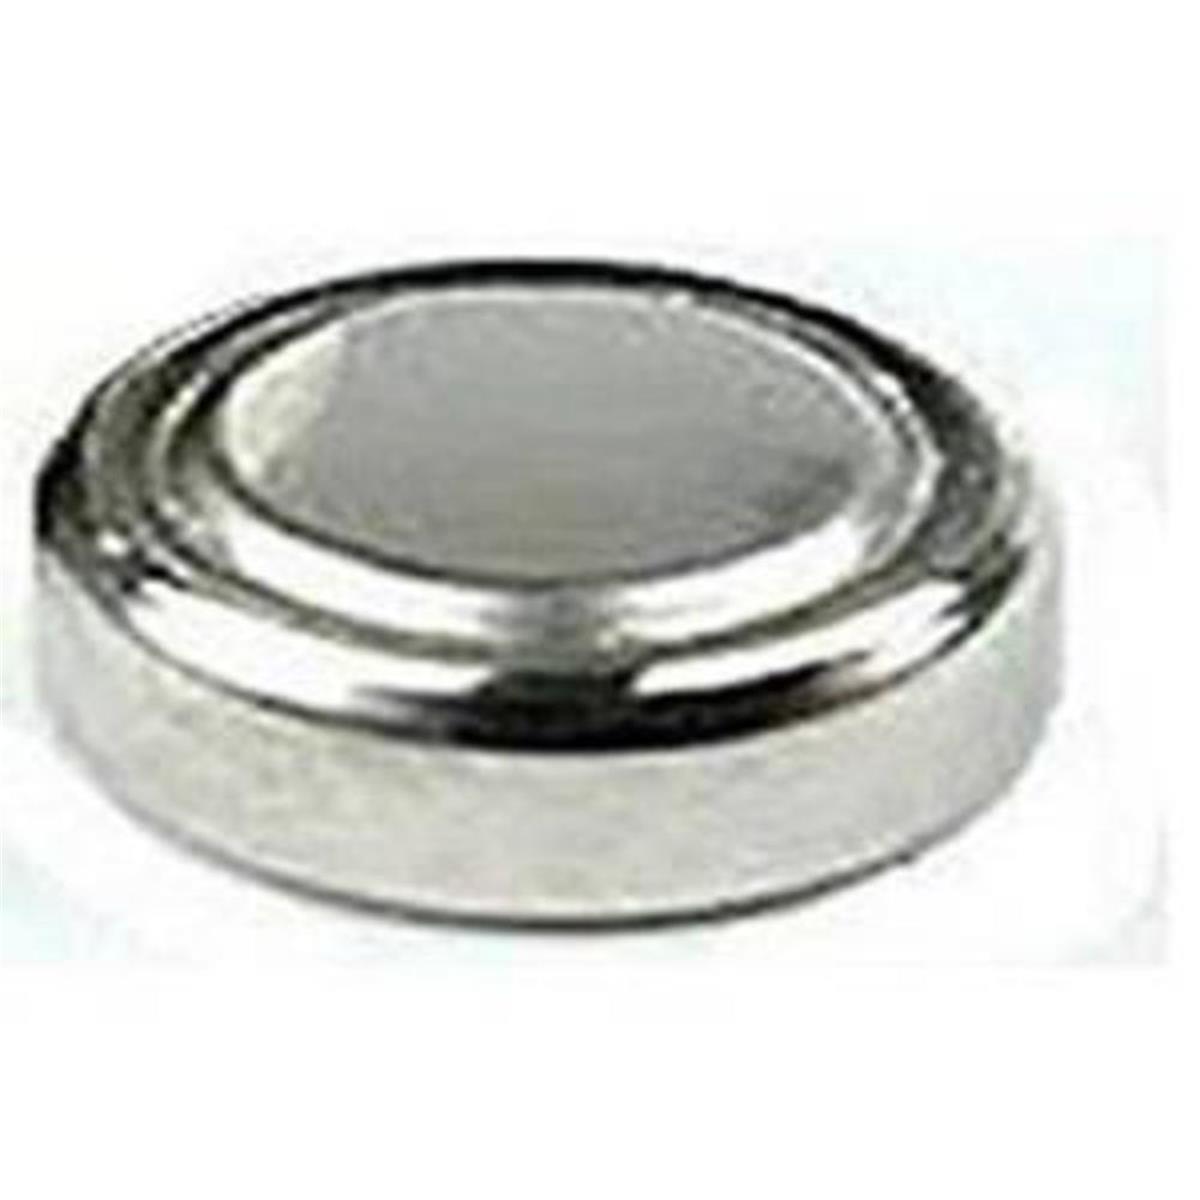 Picture of Barjan 028399 Eveready Watch Battery